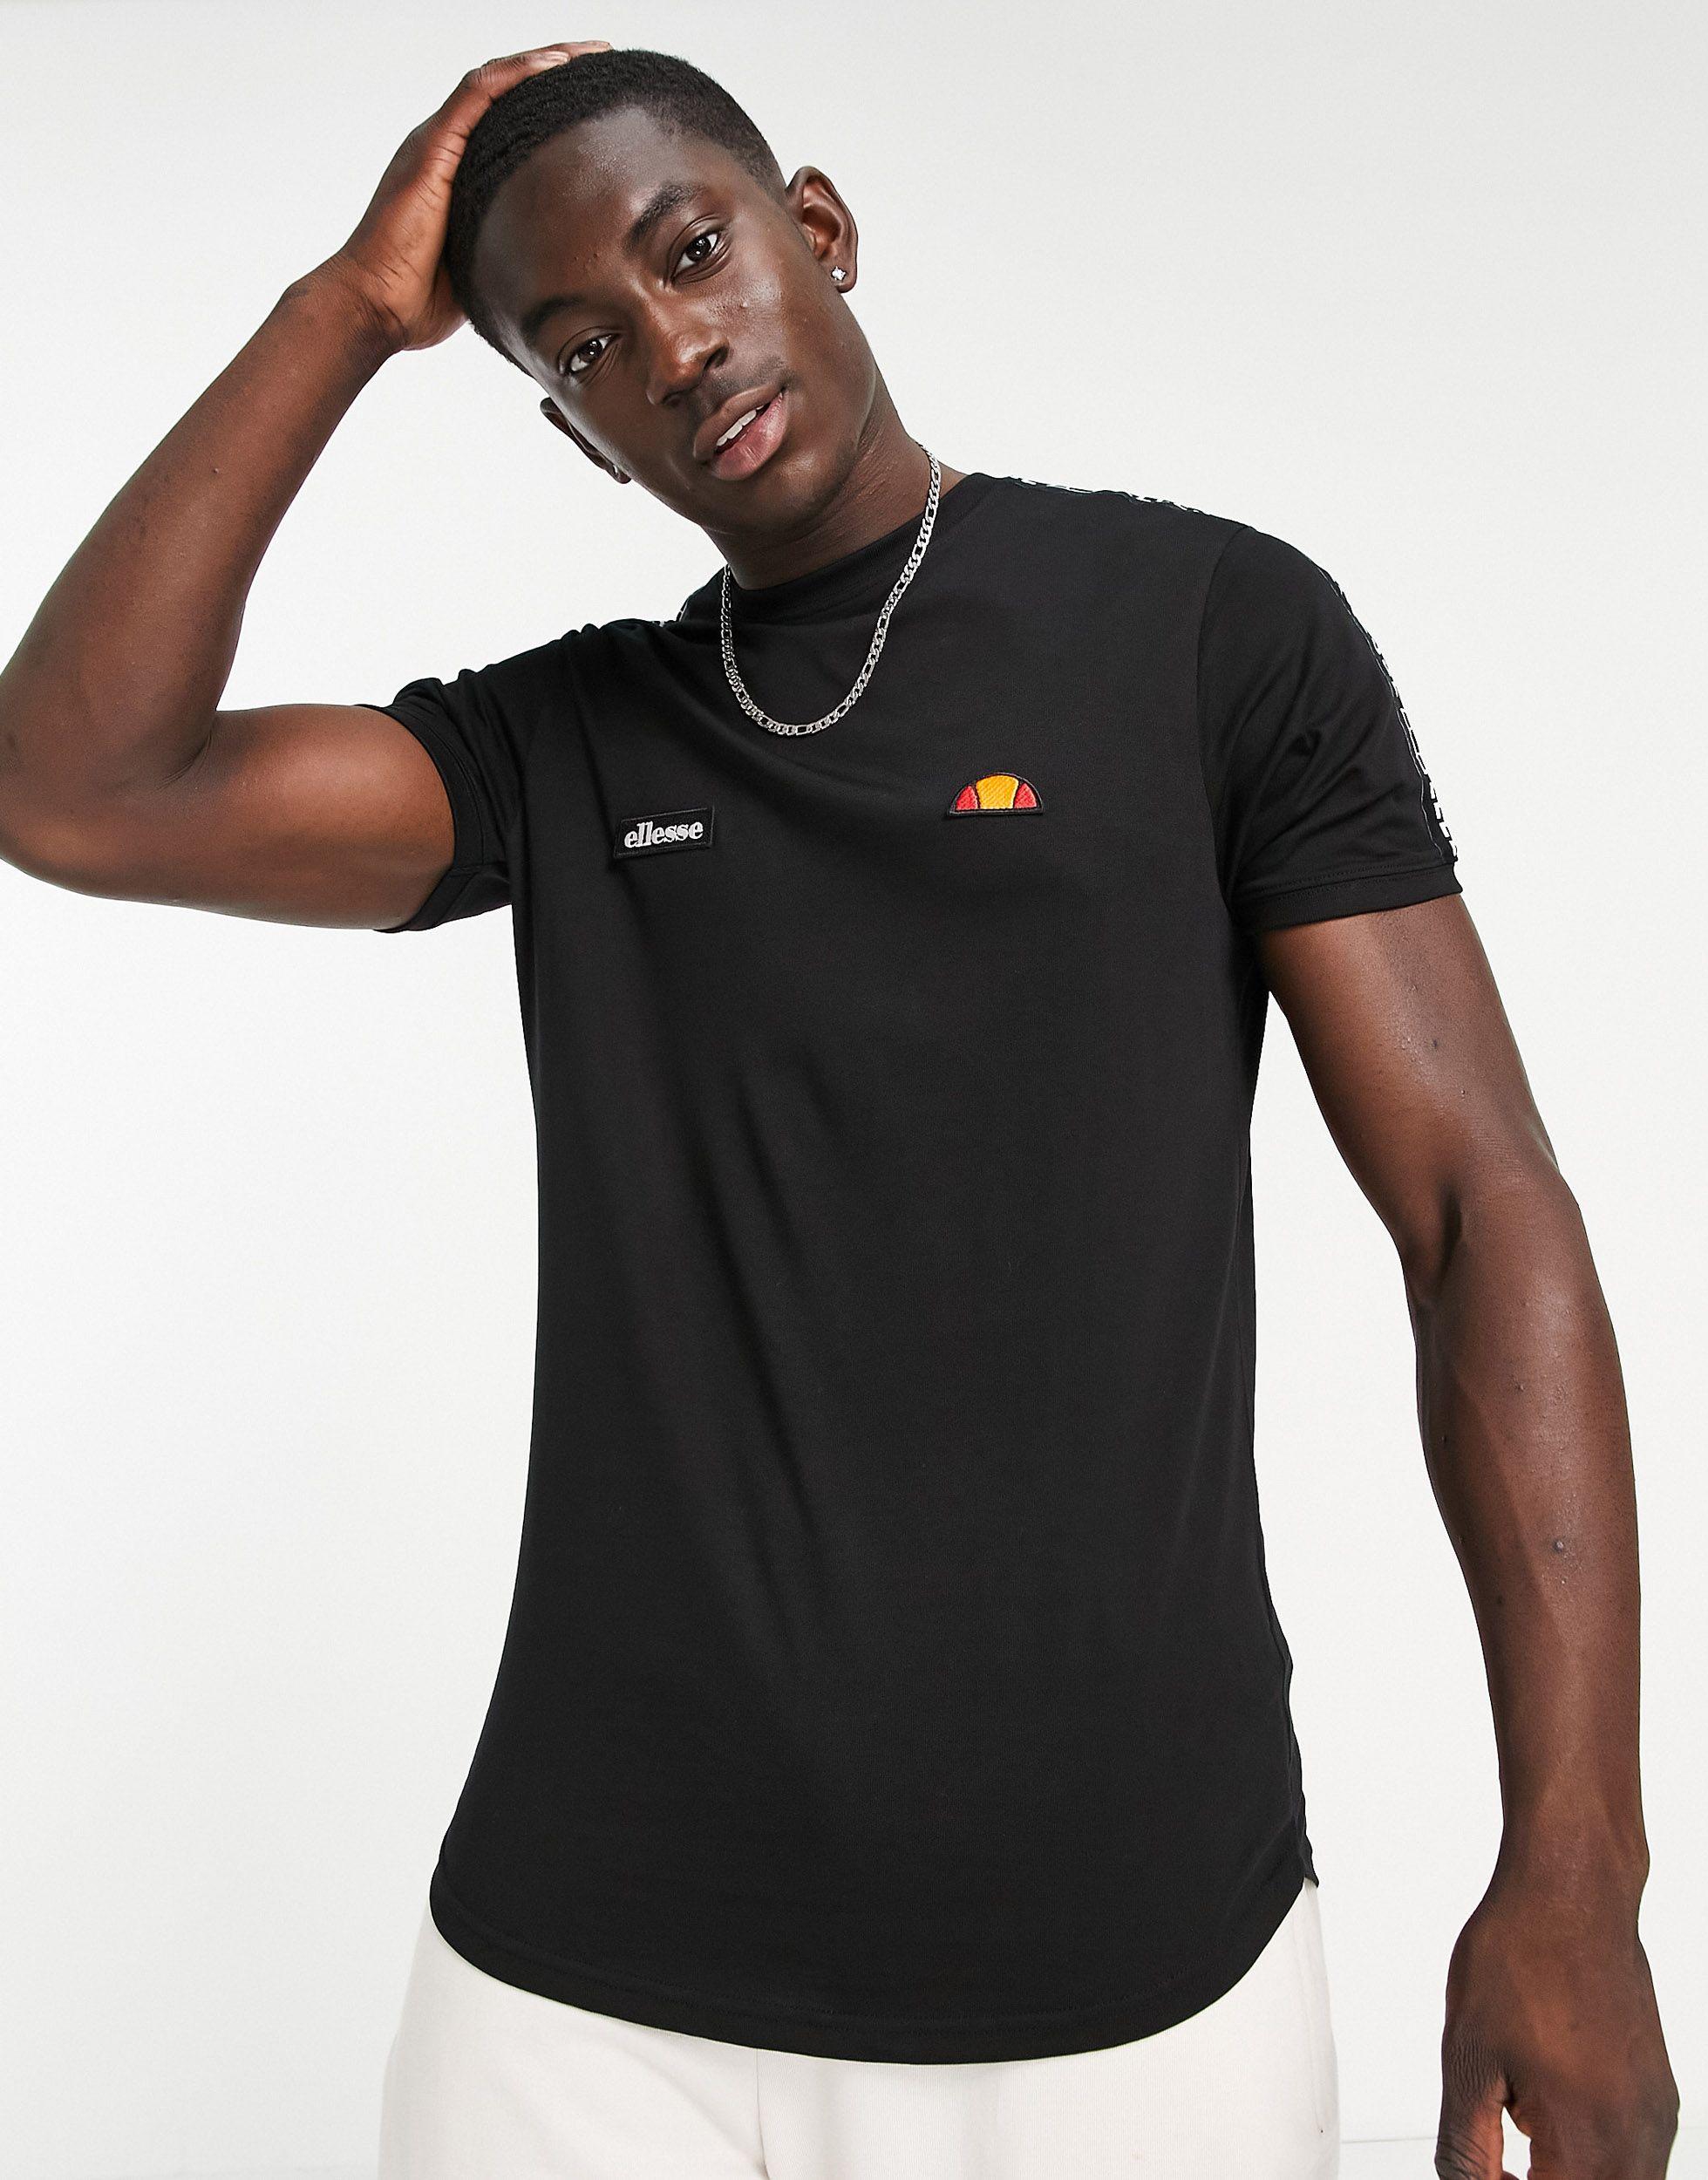 Ellesse Fede T-shirt With Taping in Black for Men - Lyst